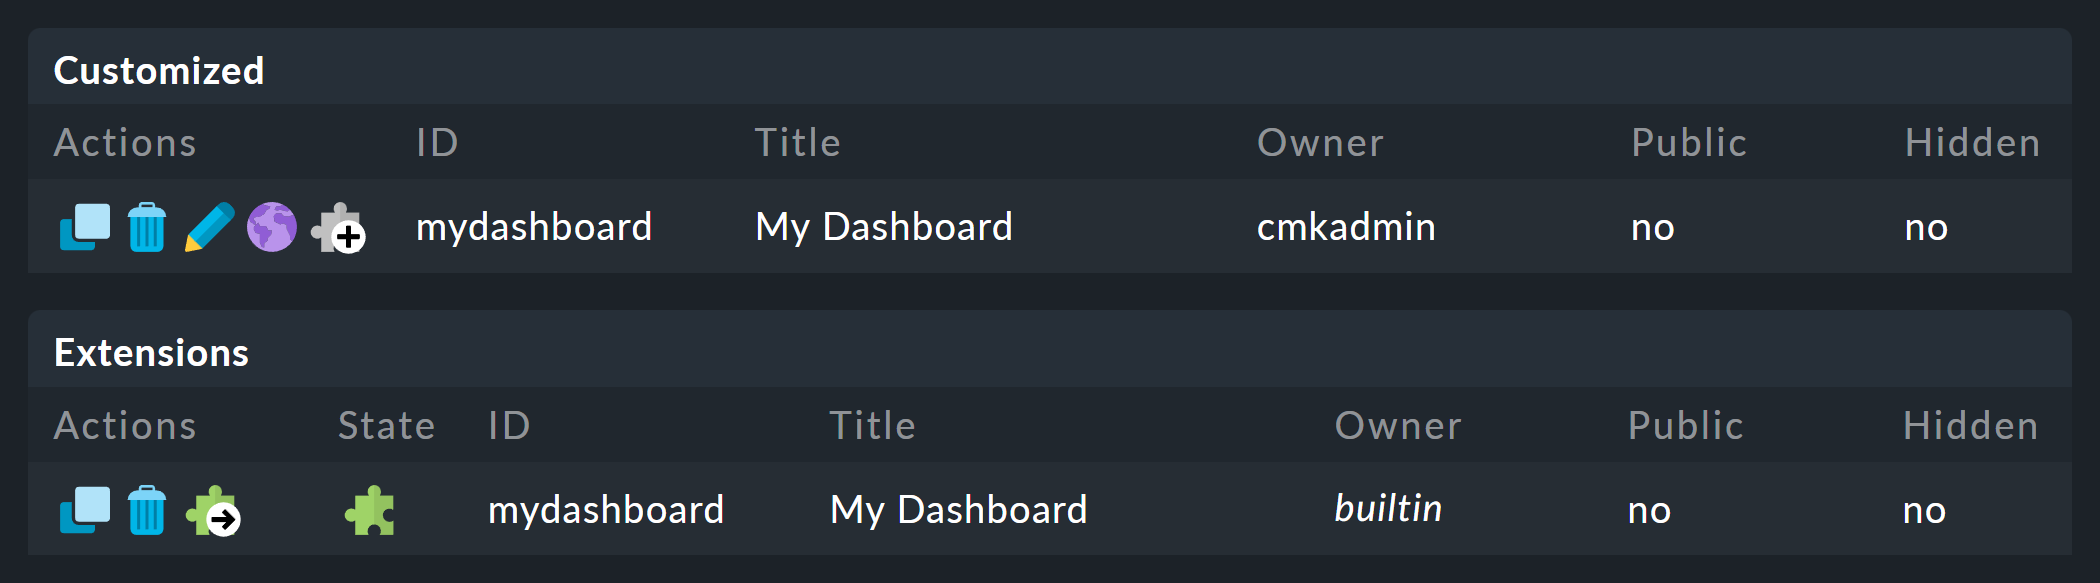 Lists of customized dashboards and dashboards managed as extensions.